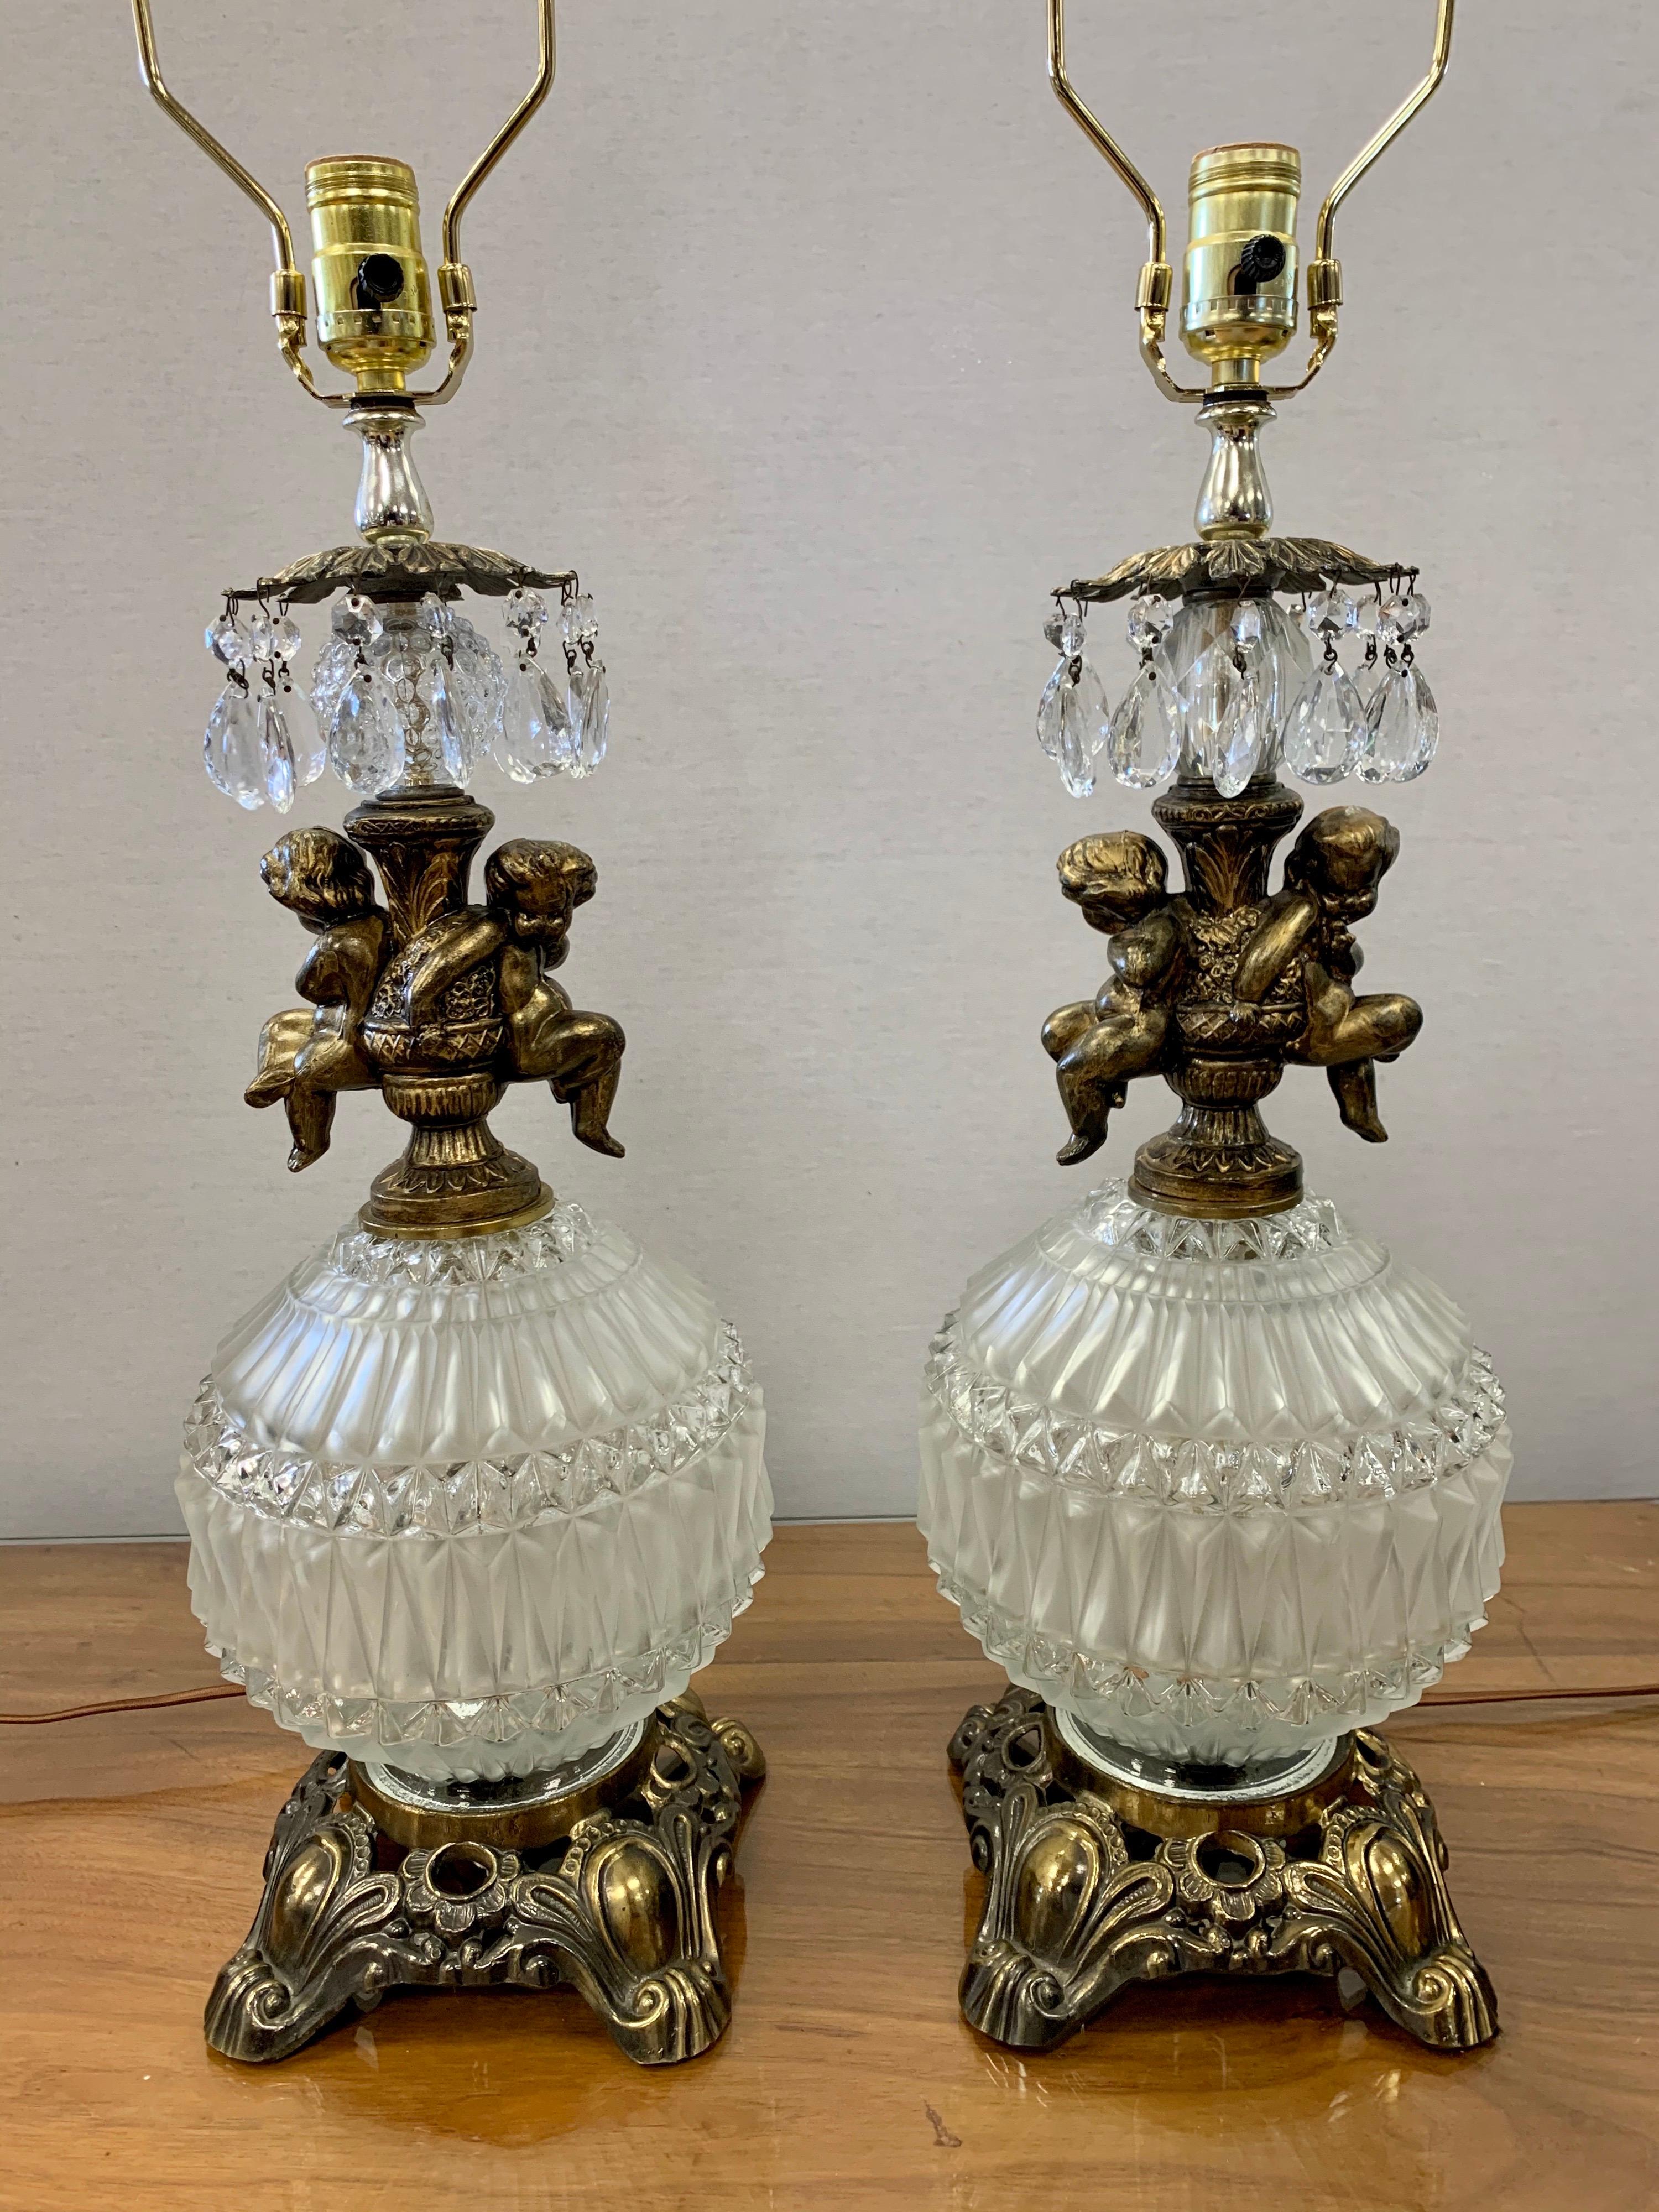 Elegant pair of frosted glass and brass table lamps with iconic Hollywood Regency
style. These table lamps stand tall at almost three feet from top to bottom and have
gorgeous lines. Wired for US and in perfect working order. Mint condition. Now,